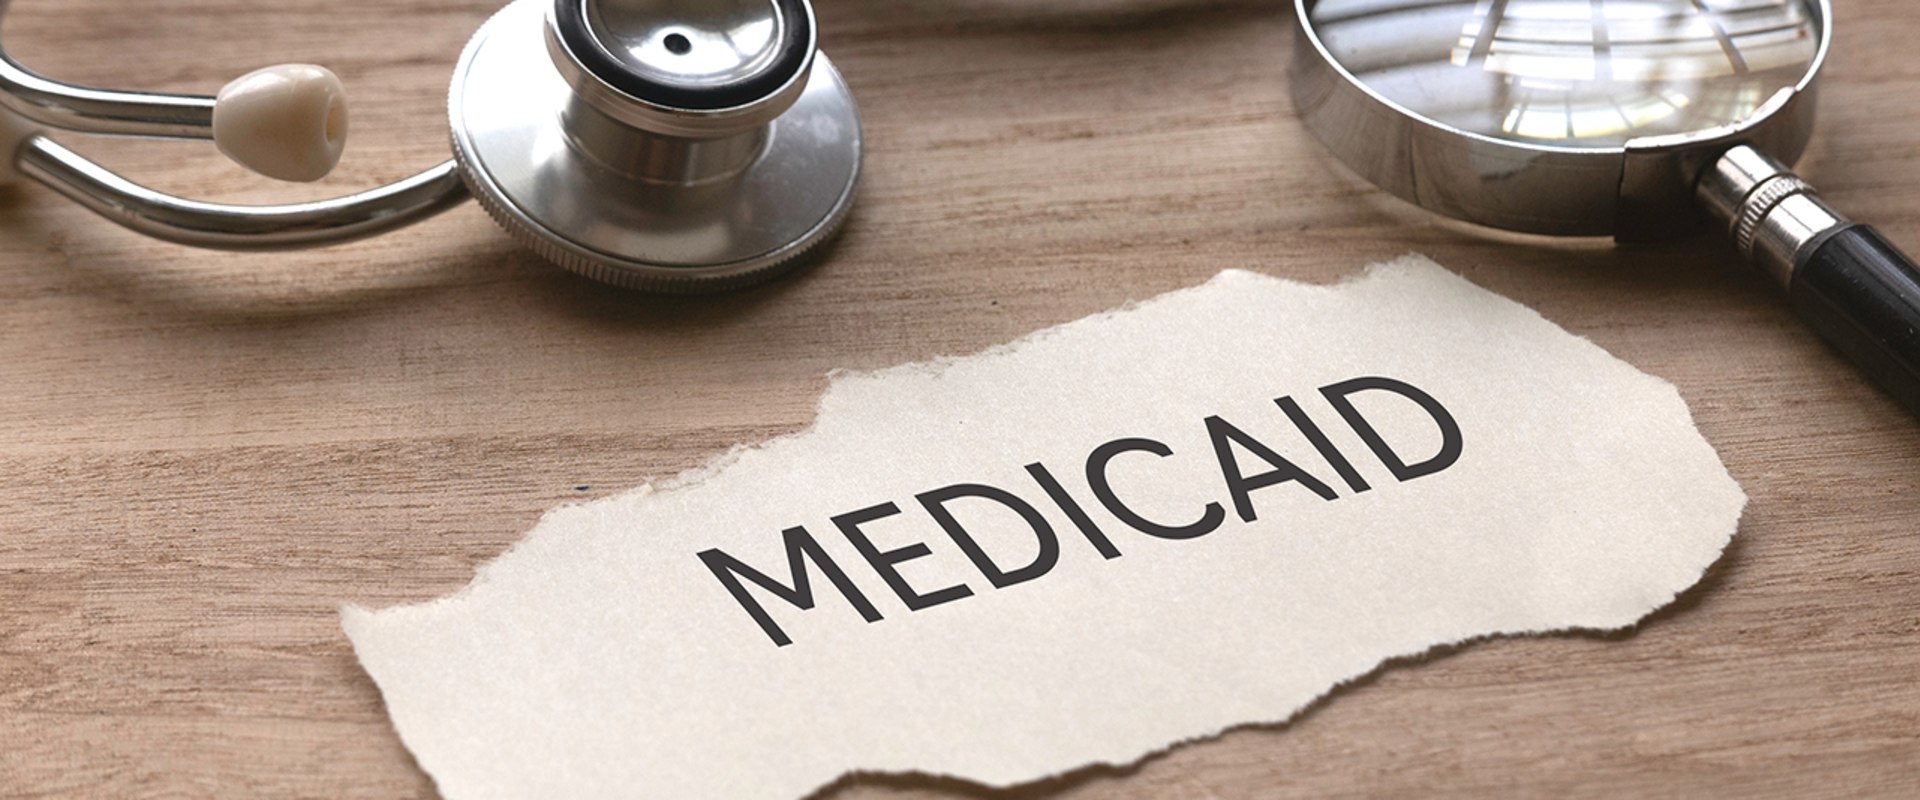 Can a Medicare Fraud Whistleblower Be Retaliated Against?